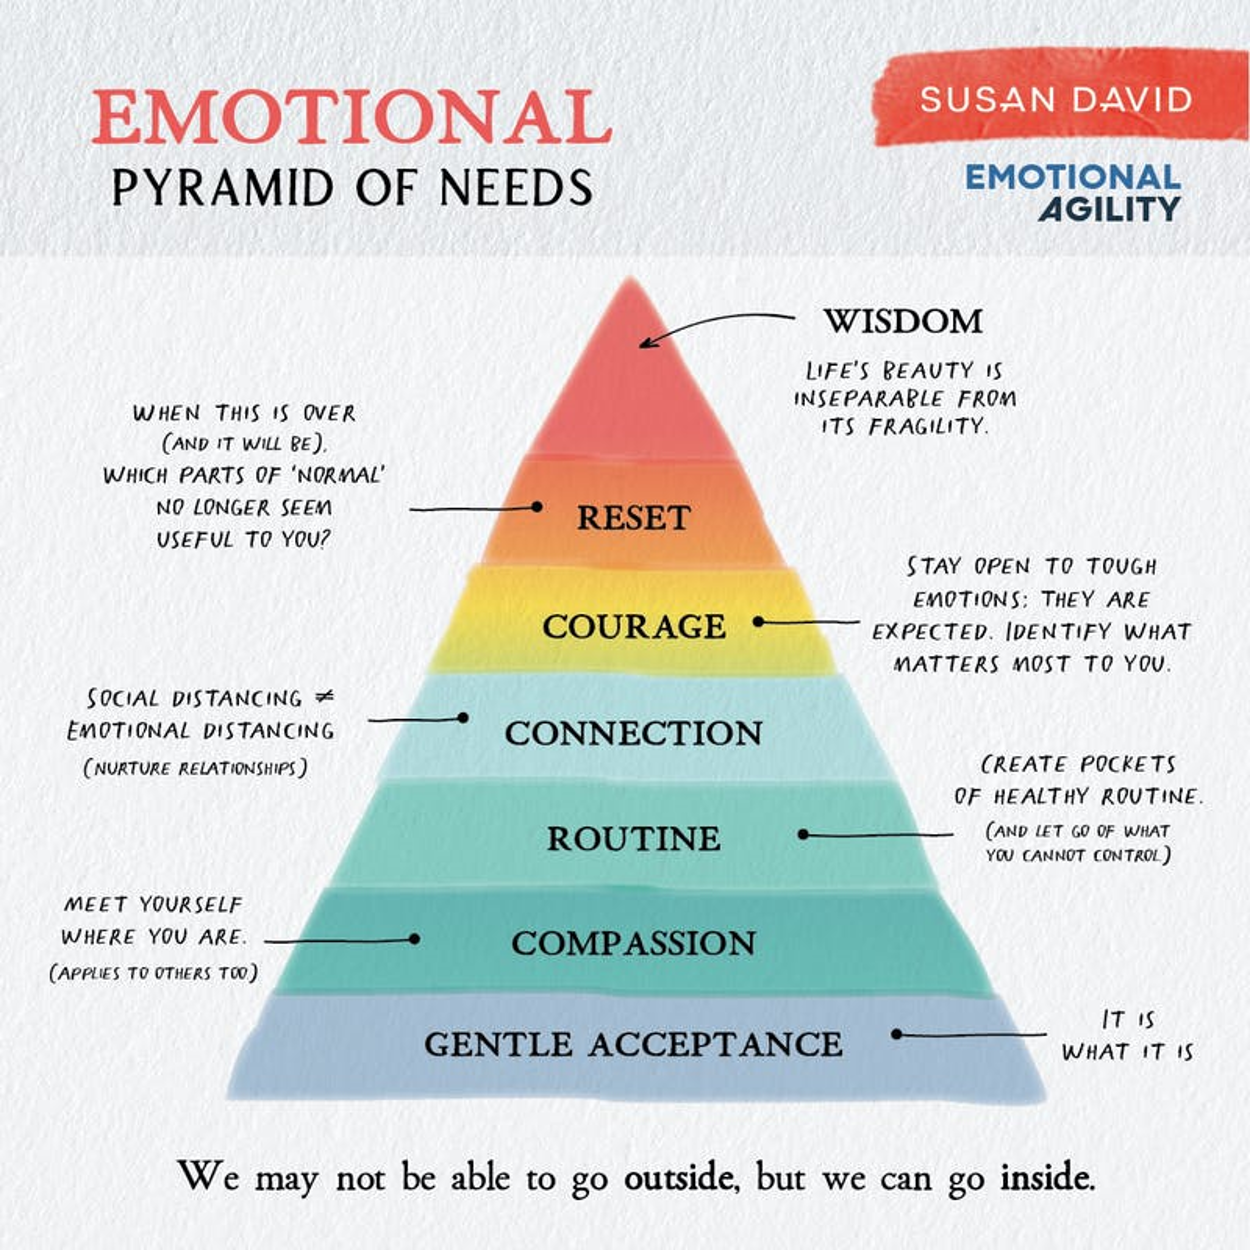 Emotional Pyramid of Needs by Susan David author of Emotional Agility.  Underneath the pyramid are the words: We may not be able to go outside, but we can go inside.  The pyramid has  7 levels. The bottom level of pyramid is labelled Gentle Acceptance - It is what it is.  Level 6 is labelled compassion - Meet yourself where you are (applies to others too). Level 5 is labelled routine - create pockets of healthy routine (and let go of what you cannot control). Level 4 is labelled connection - social distancing not emotional distancing (nurture relationships), Level 3 is labelled courage - stay open to tough emotions: They are expected. Identify what matters most to you. Level 2 is labelled reset - when this is over (and it will be) which parts of 'normal' no longer seem useful to you?   Level 1 at the top of the pyramid is labelled wisdom - life's beauty is inseparable from it's fragility. 